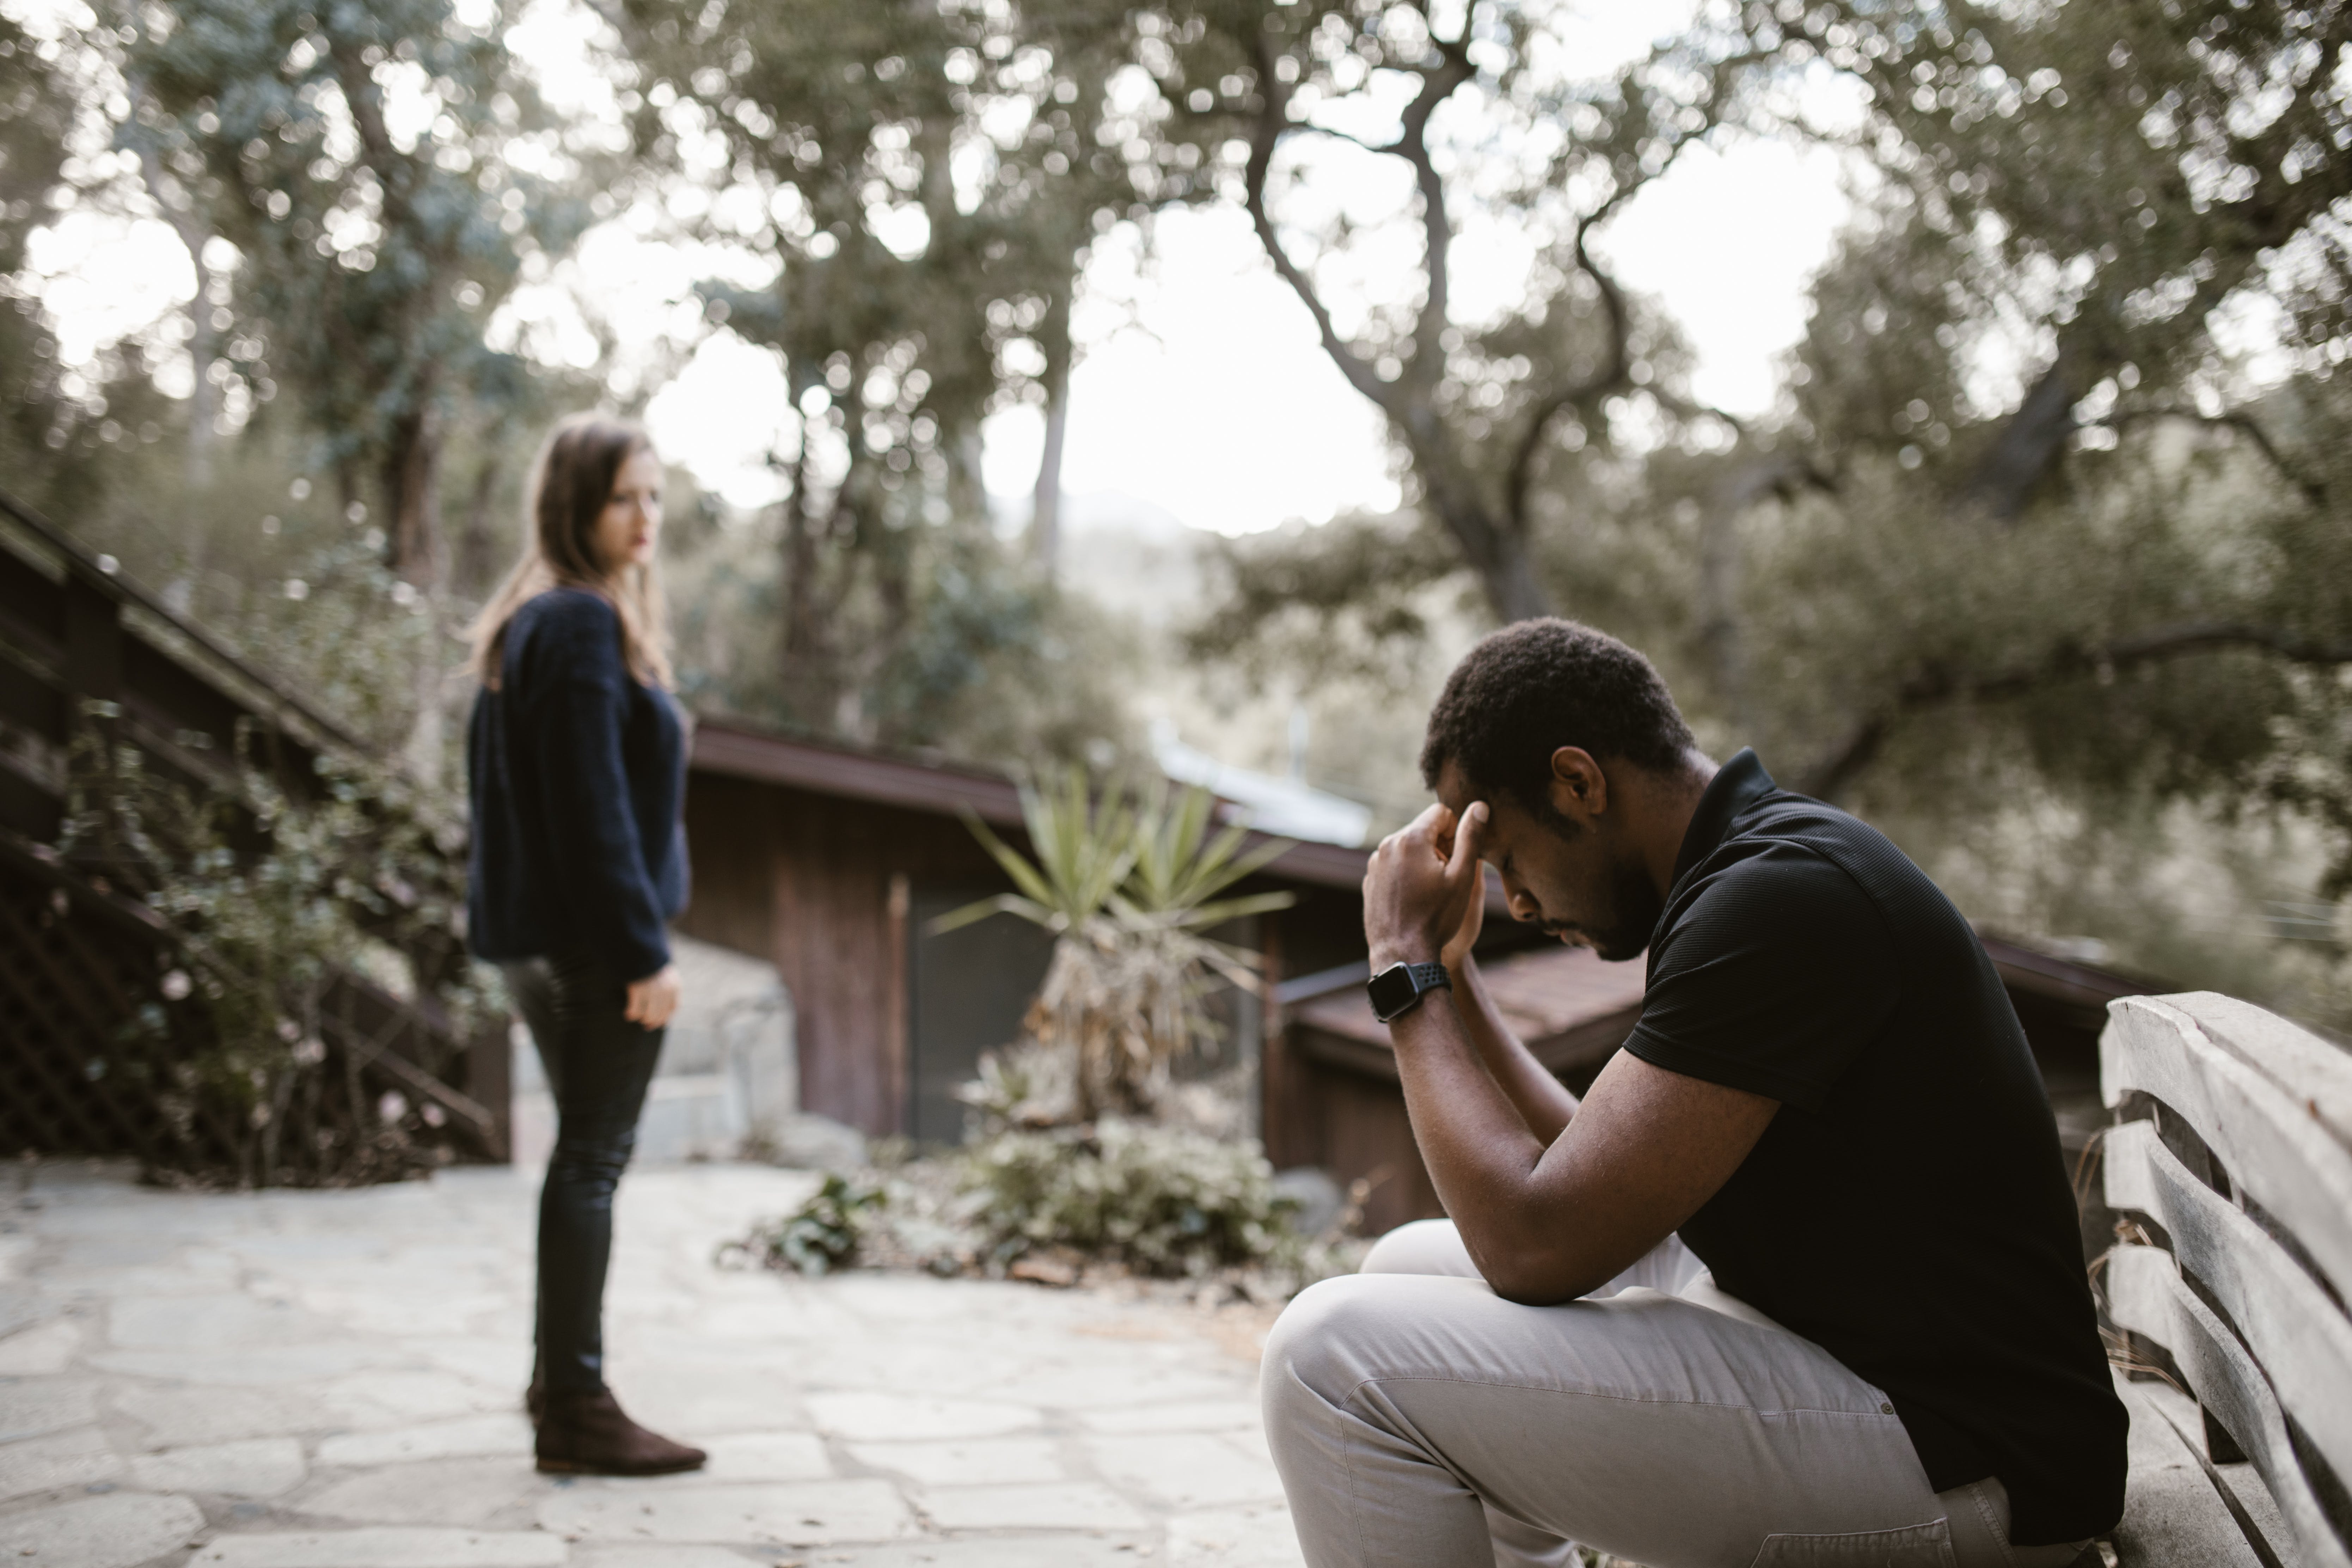 A woman looking at the stressed man | Source: Pexels